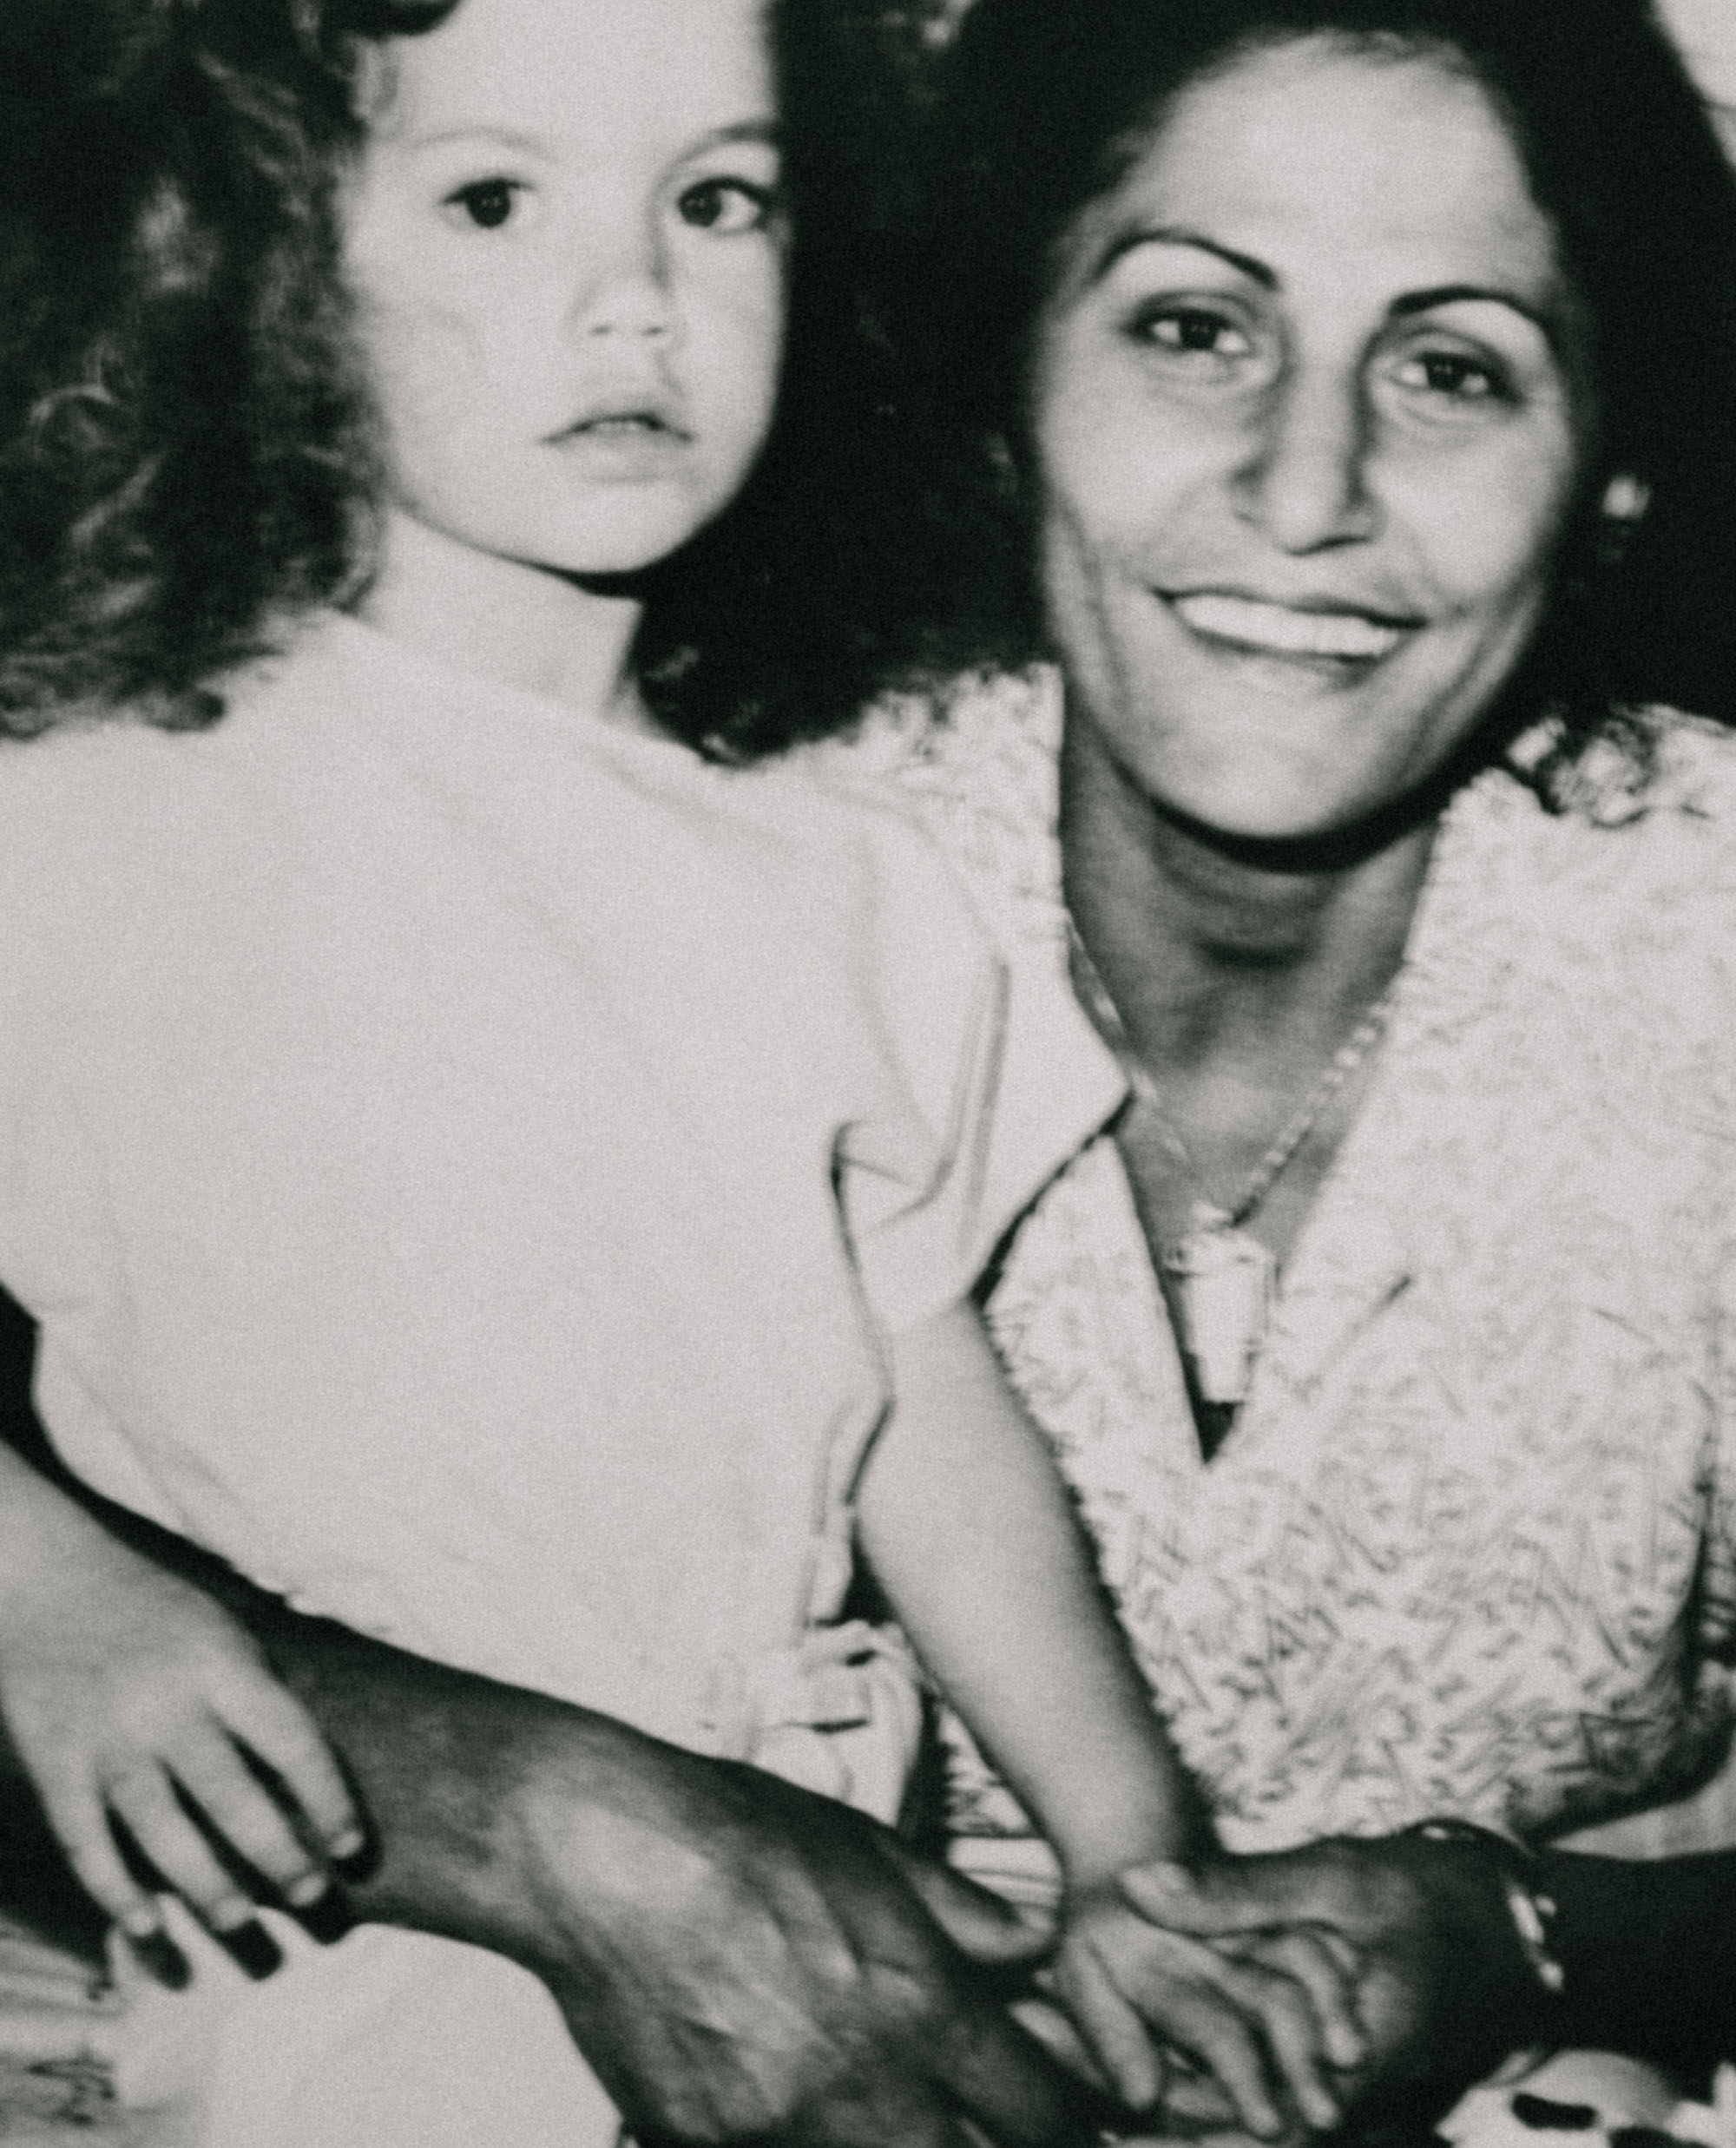 Sulome and her mother. Image courtesy of Sulome Anderson.